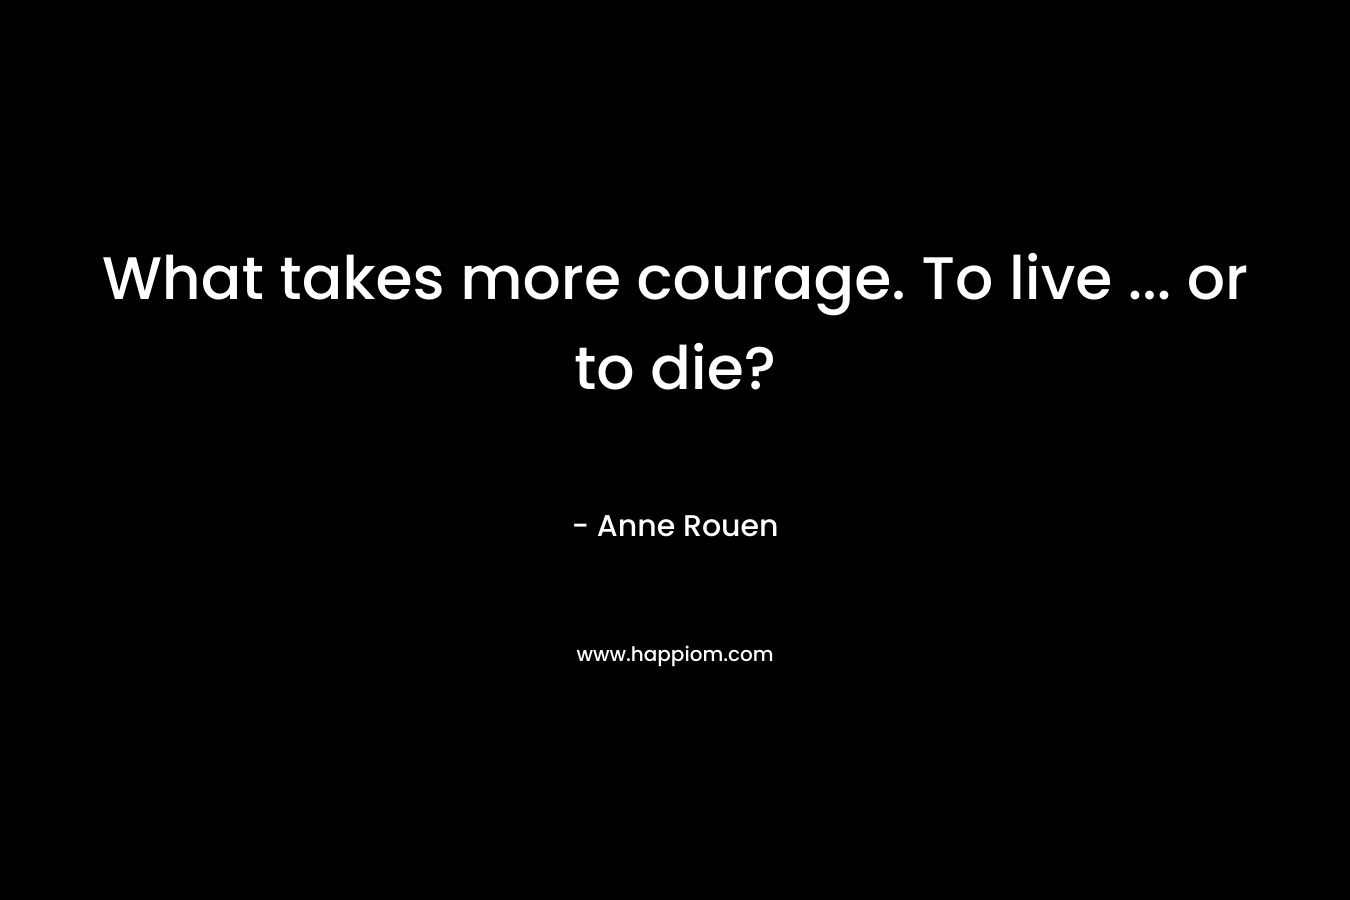 What takes more courage. To live ... or to die?